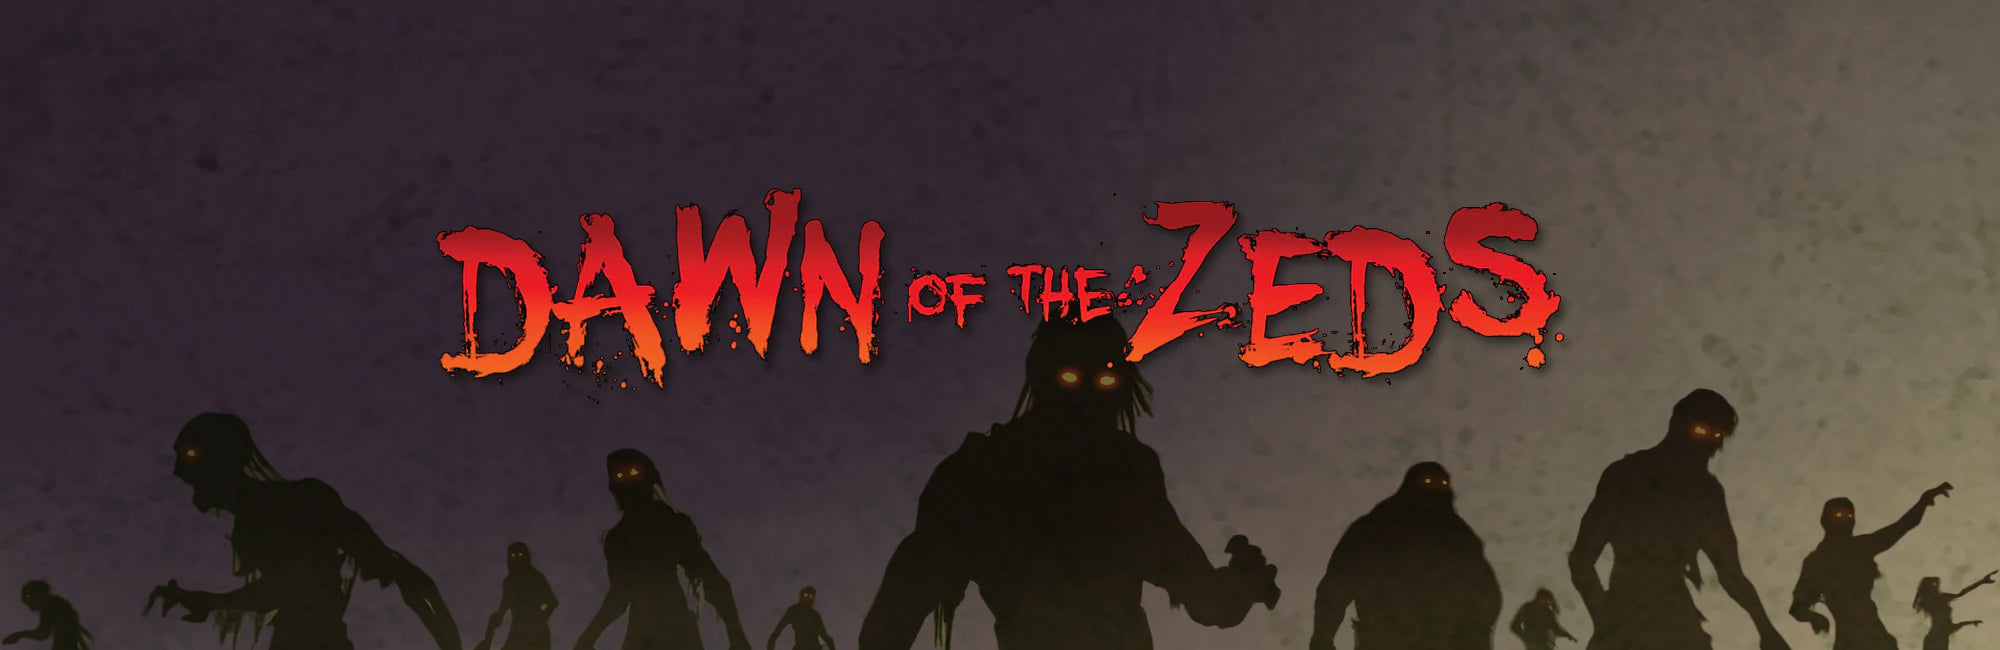 Dawn of the Zeds tabletop game